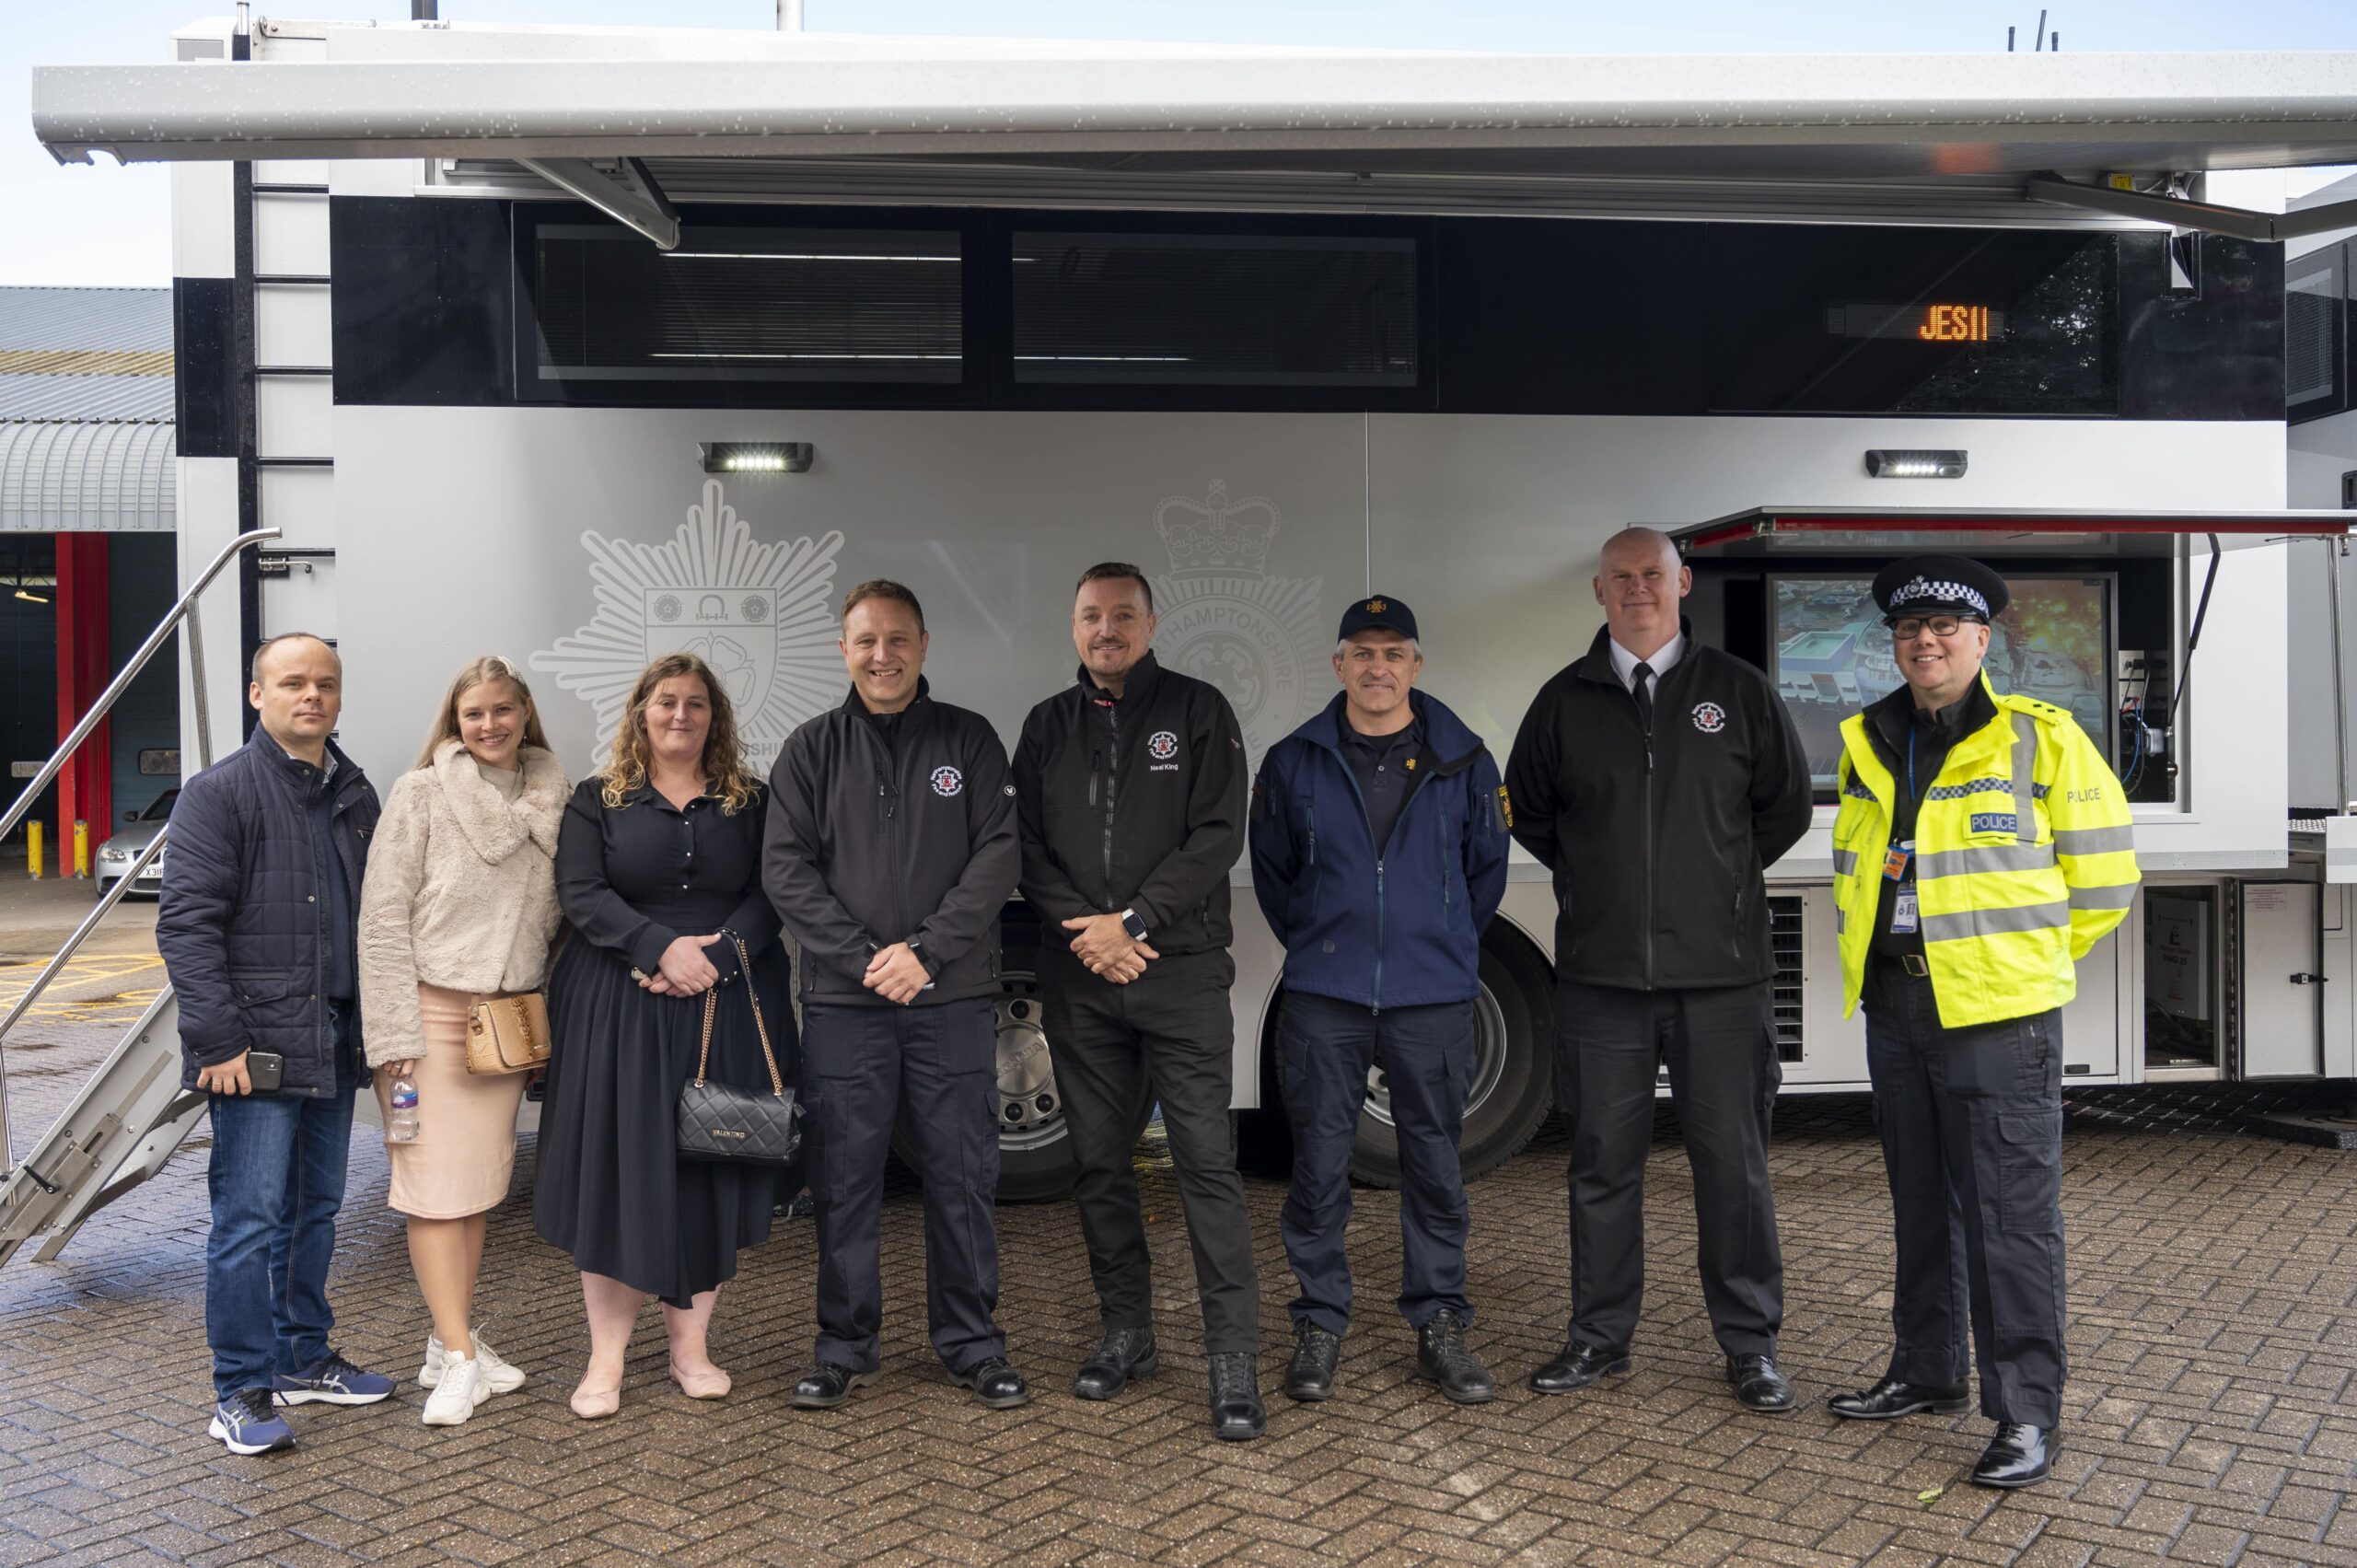 Northamptonshire Fire and Rescue Service host Ukrainian dignitaries